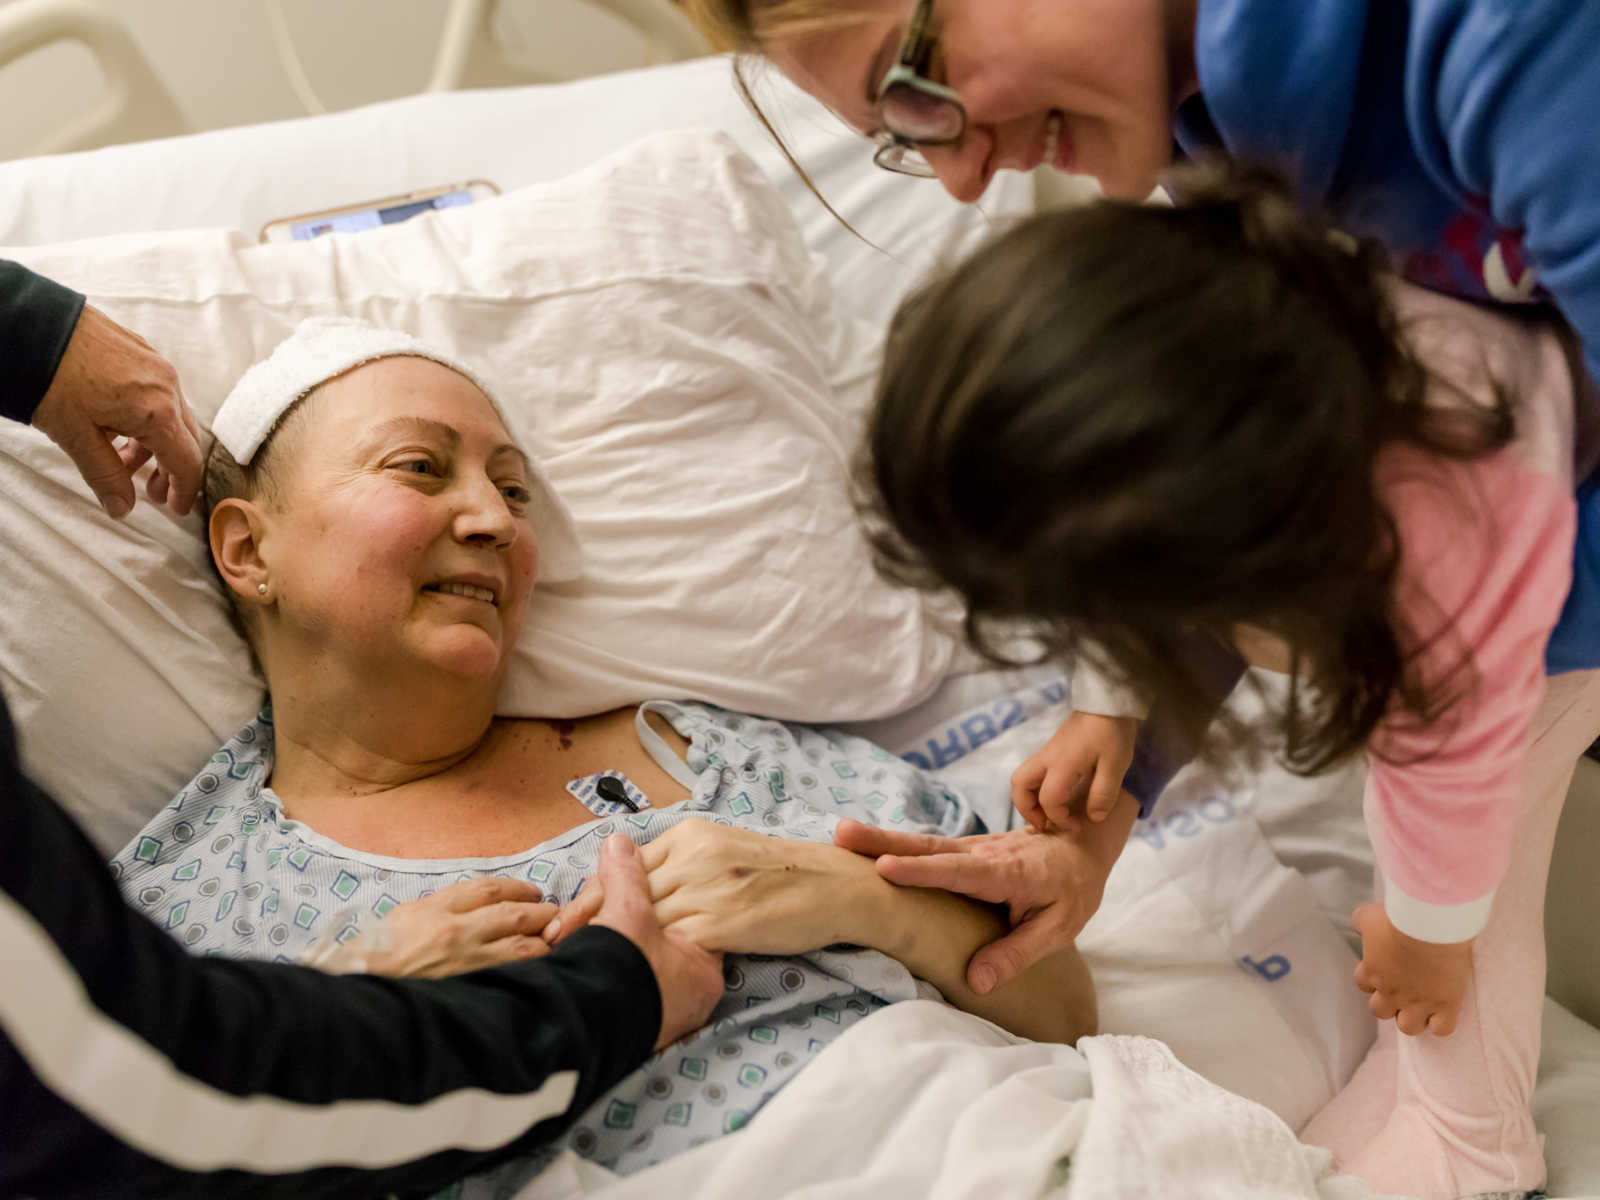 Non-hodgkin's lymphoma patient smiles up at toddler who is being help in the arms of patients sister